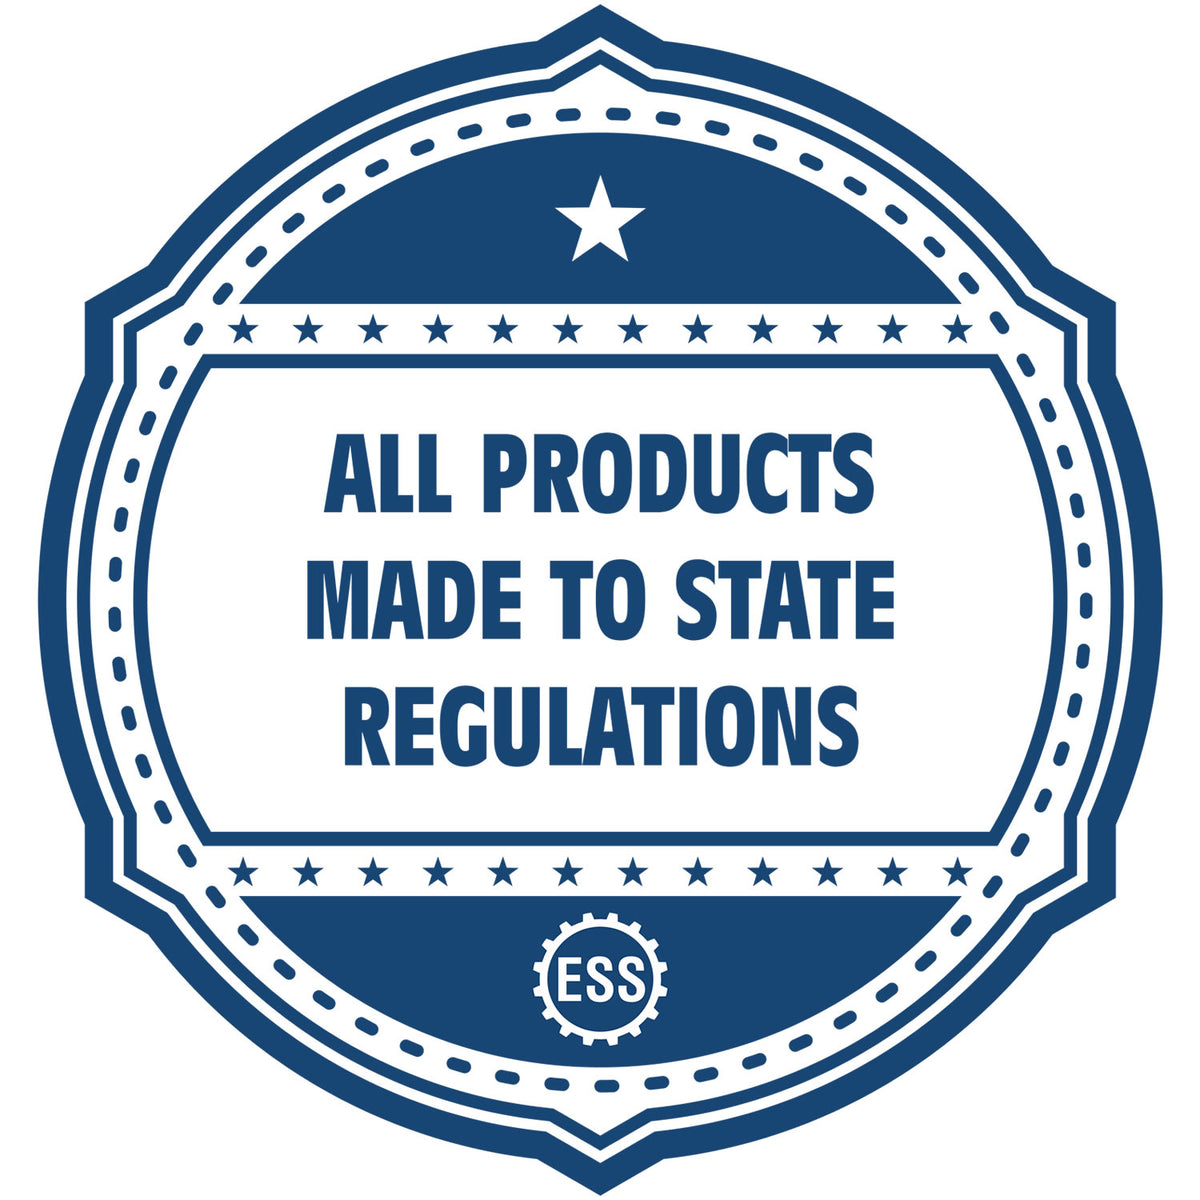 An icon or badge element for the Premium MaxLight Pre-Inked South Carolina Landscape Architectural Stamp showing that this product is made in compliance with state regulations.